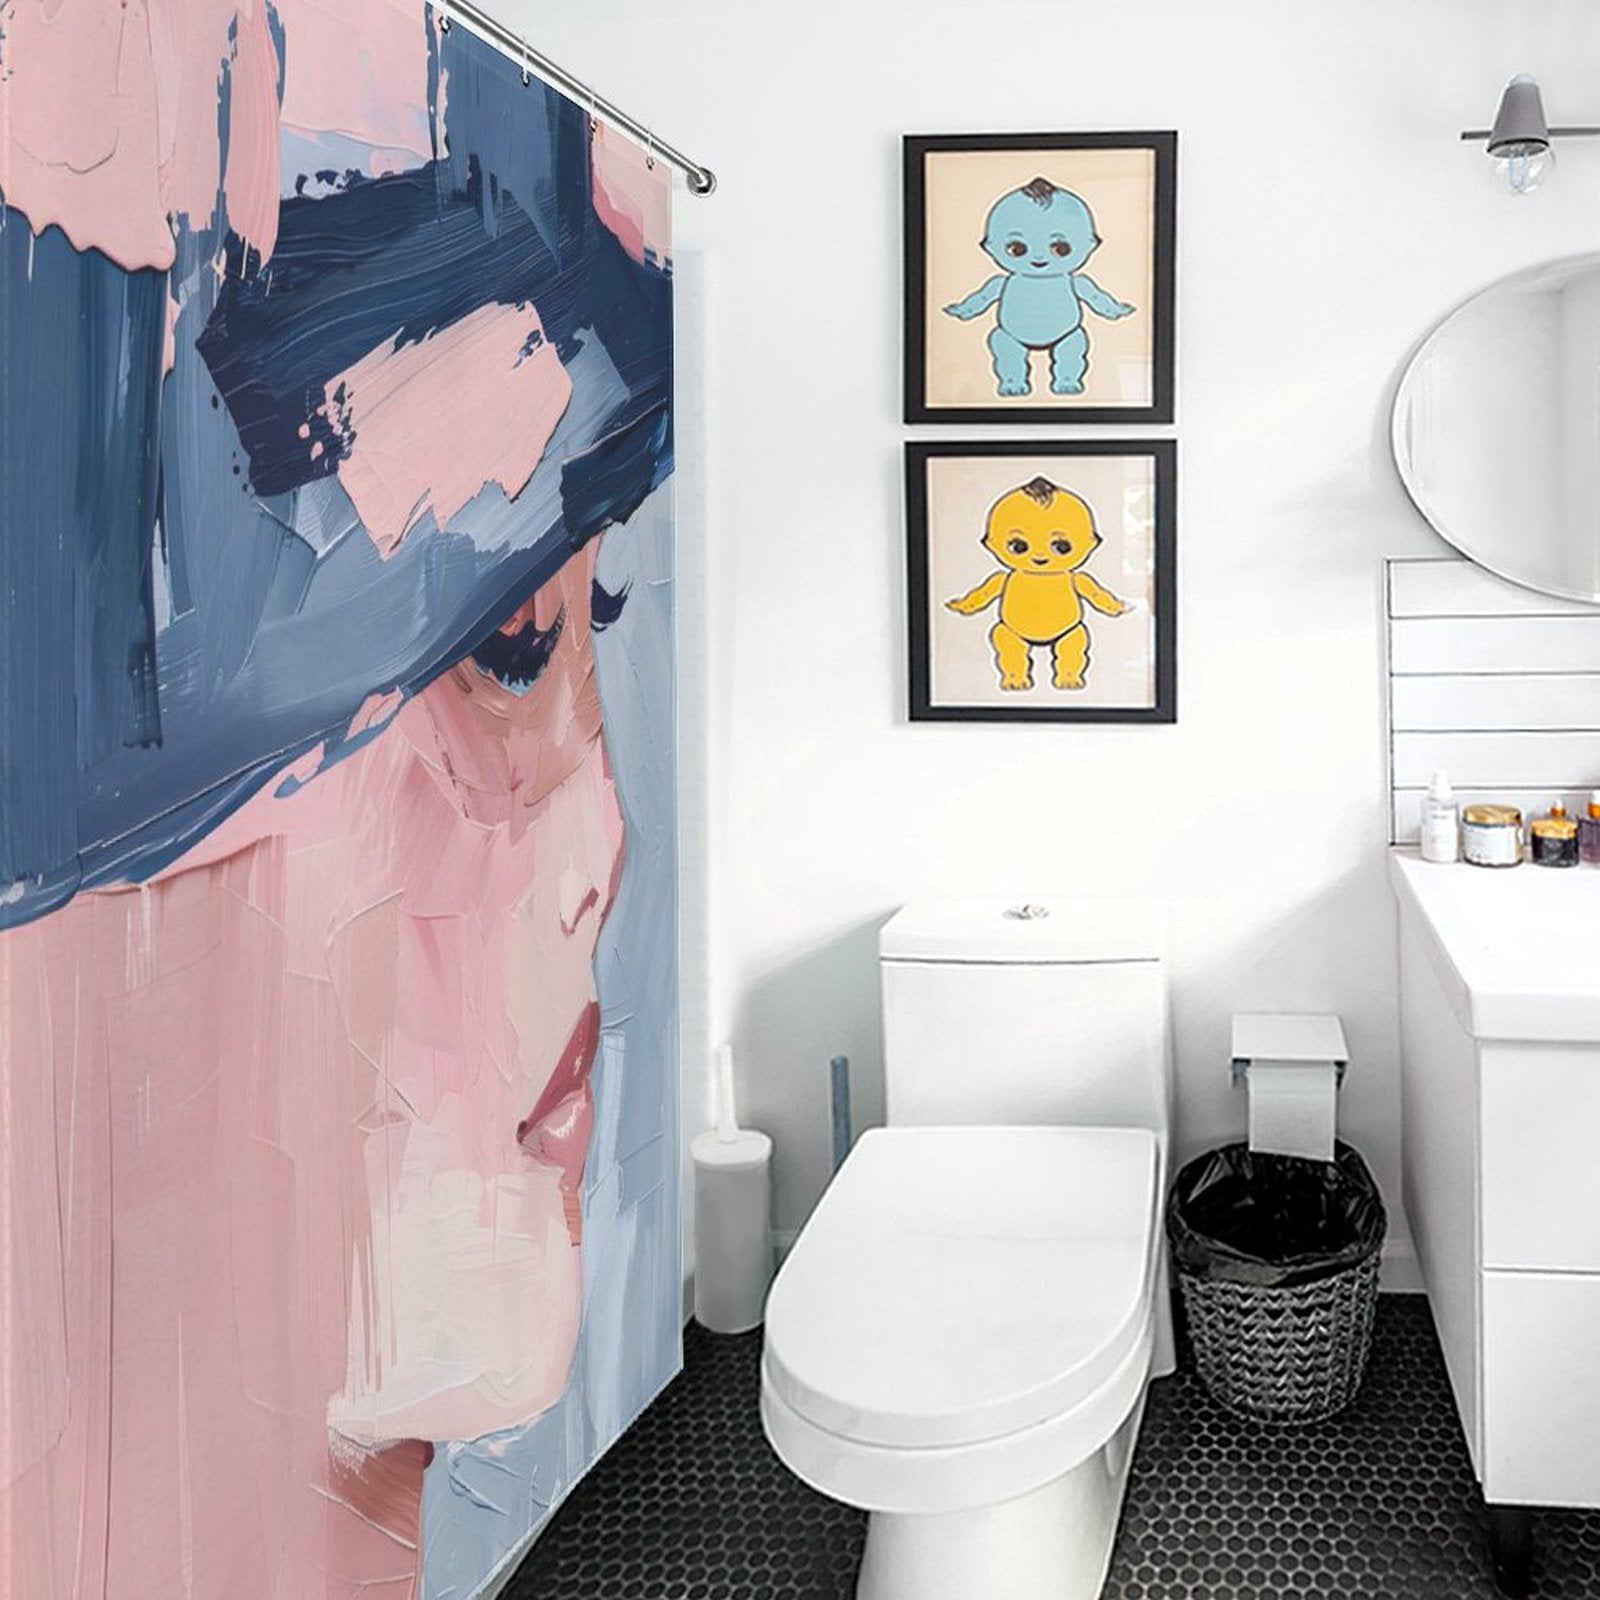 A bathroom with white walls, a toilet, a vanity with a sink, and two framed artworks of cartoon babies on the wall. A Cotton Cat Mid Century Women Face Abstract Aesthetic Oil Painting Modern Art Blush Pink Navy Blue Cream Shower Curtain is prominently displayed.